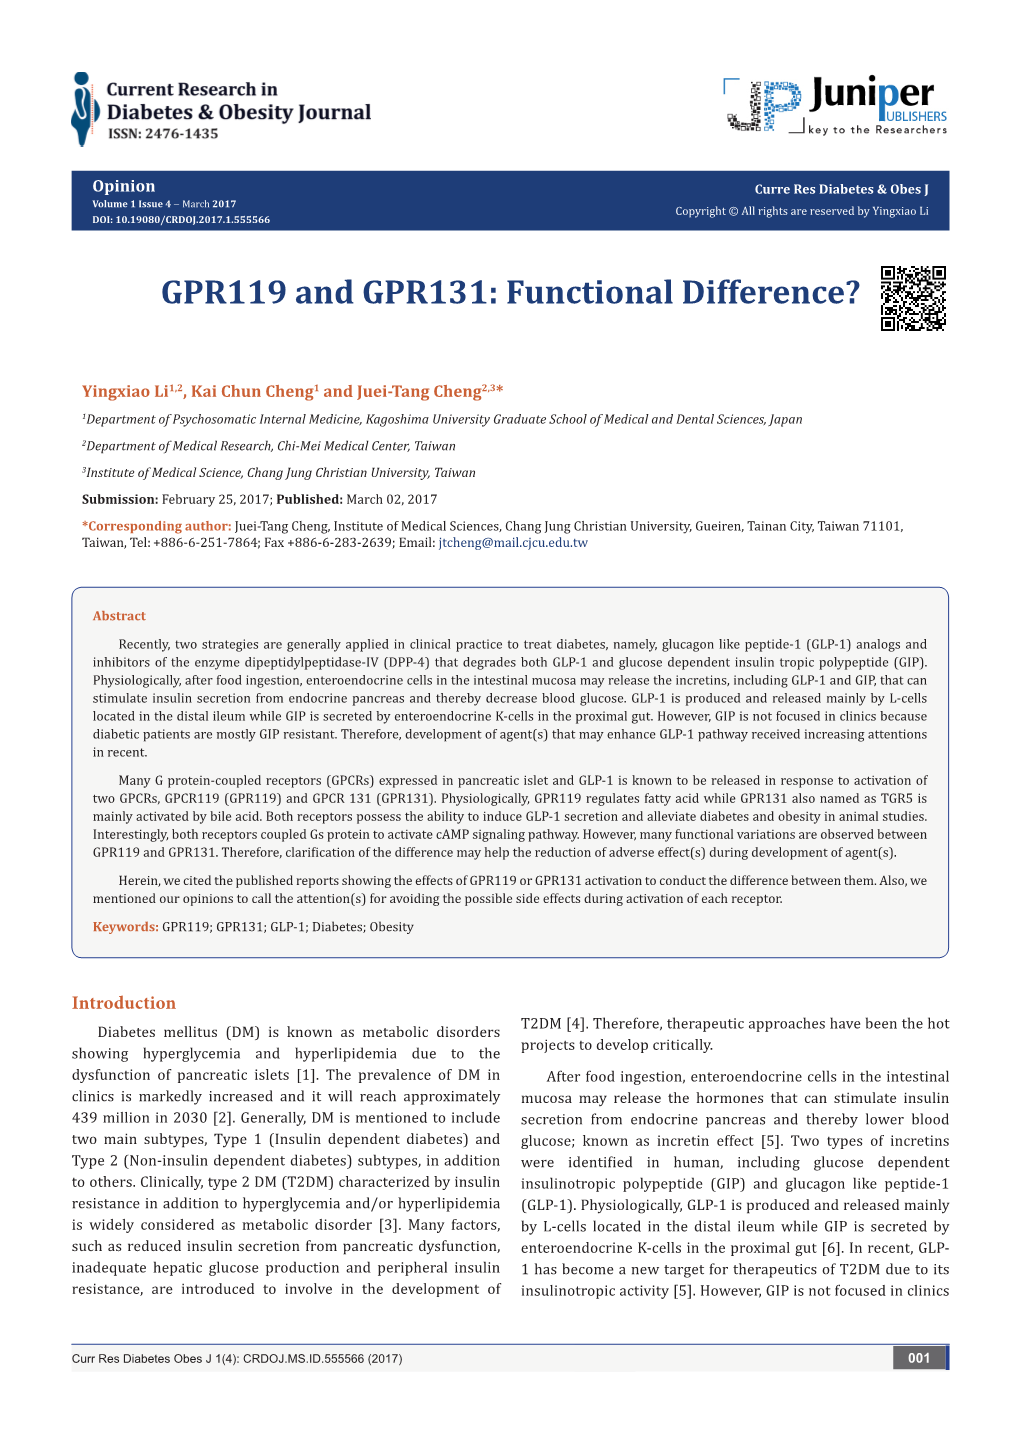 GPR119 and GPR131: Functional Difference?